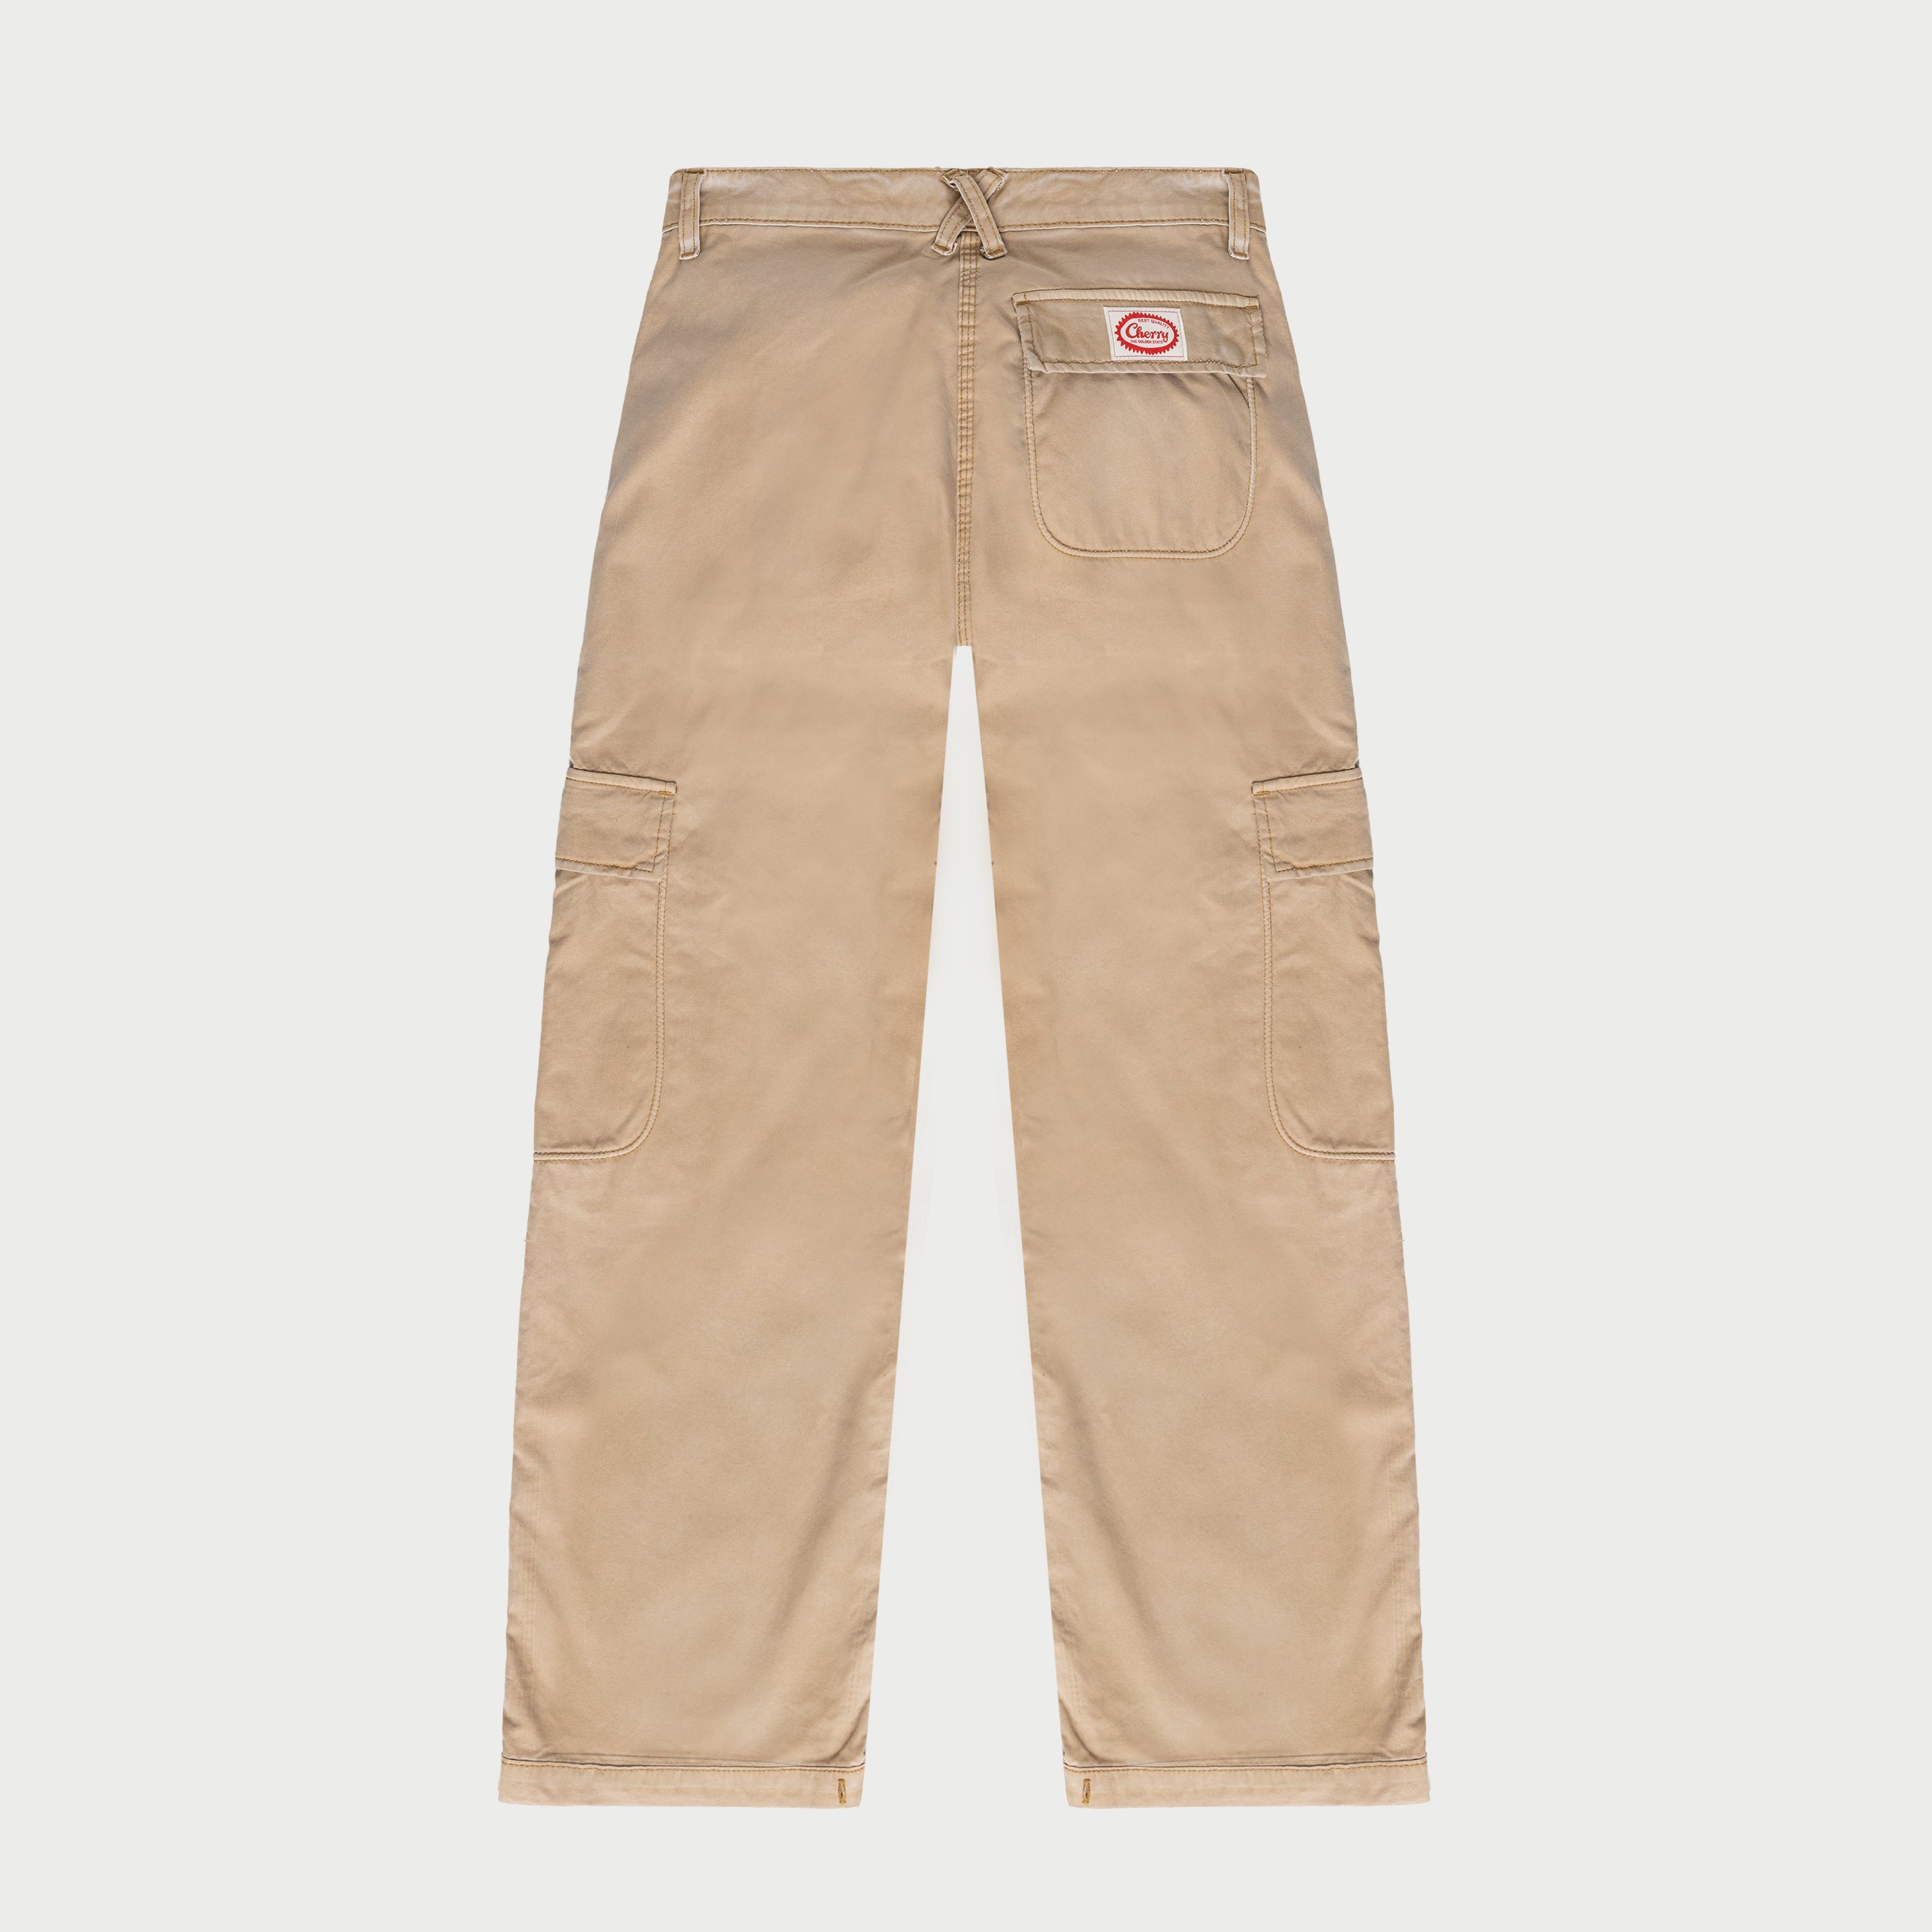 Dickies Waist Size Portugal, SAVE 46% 